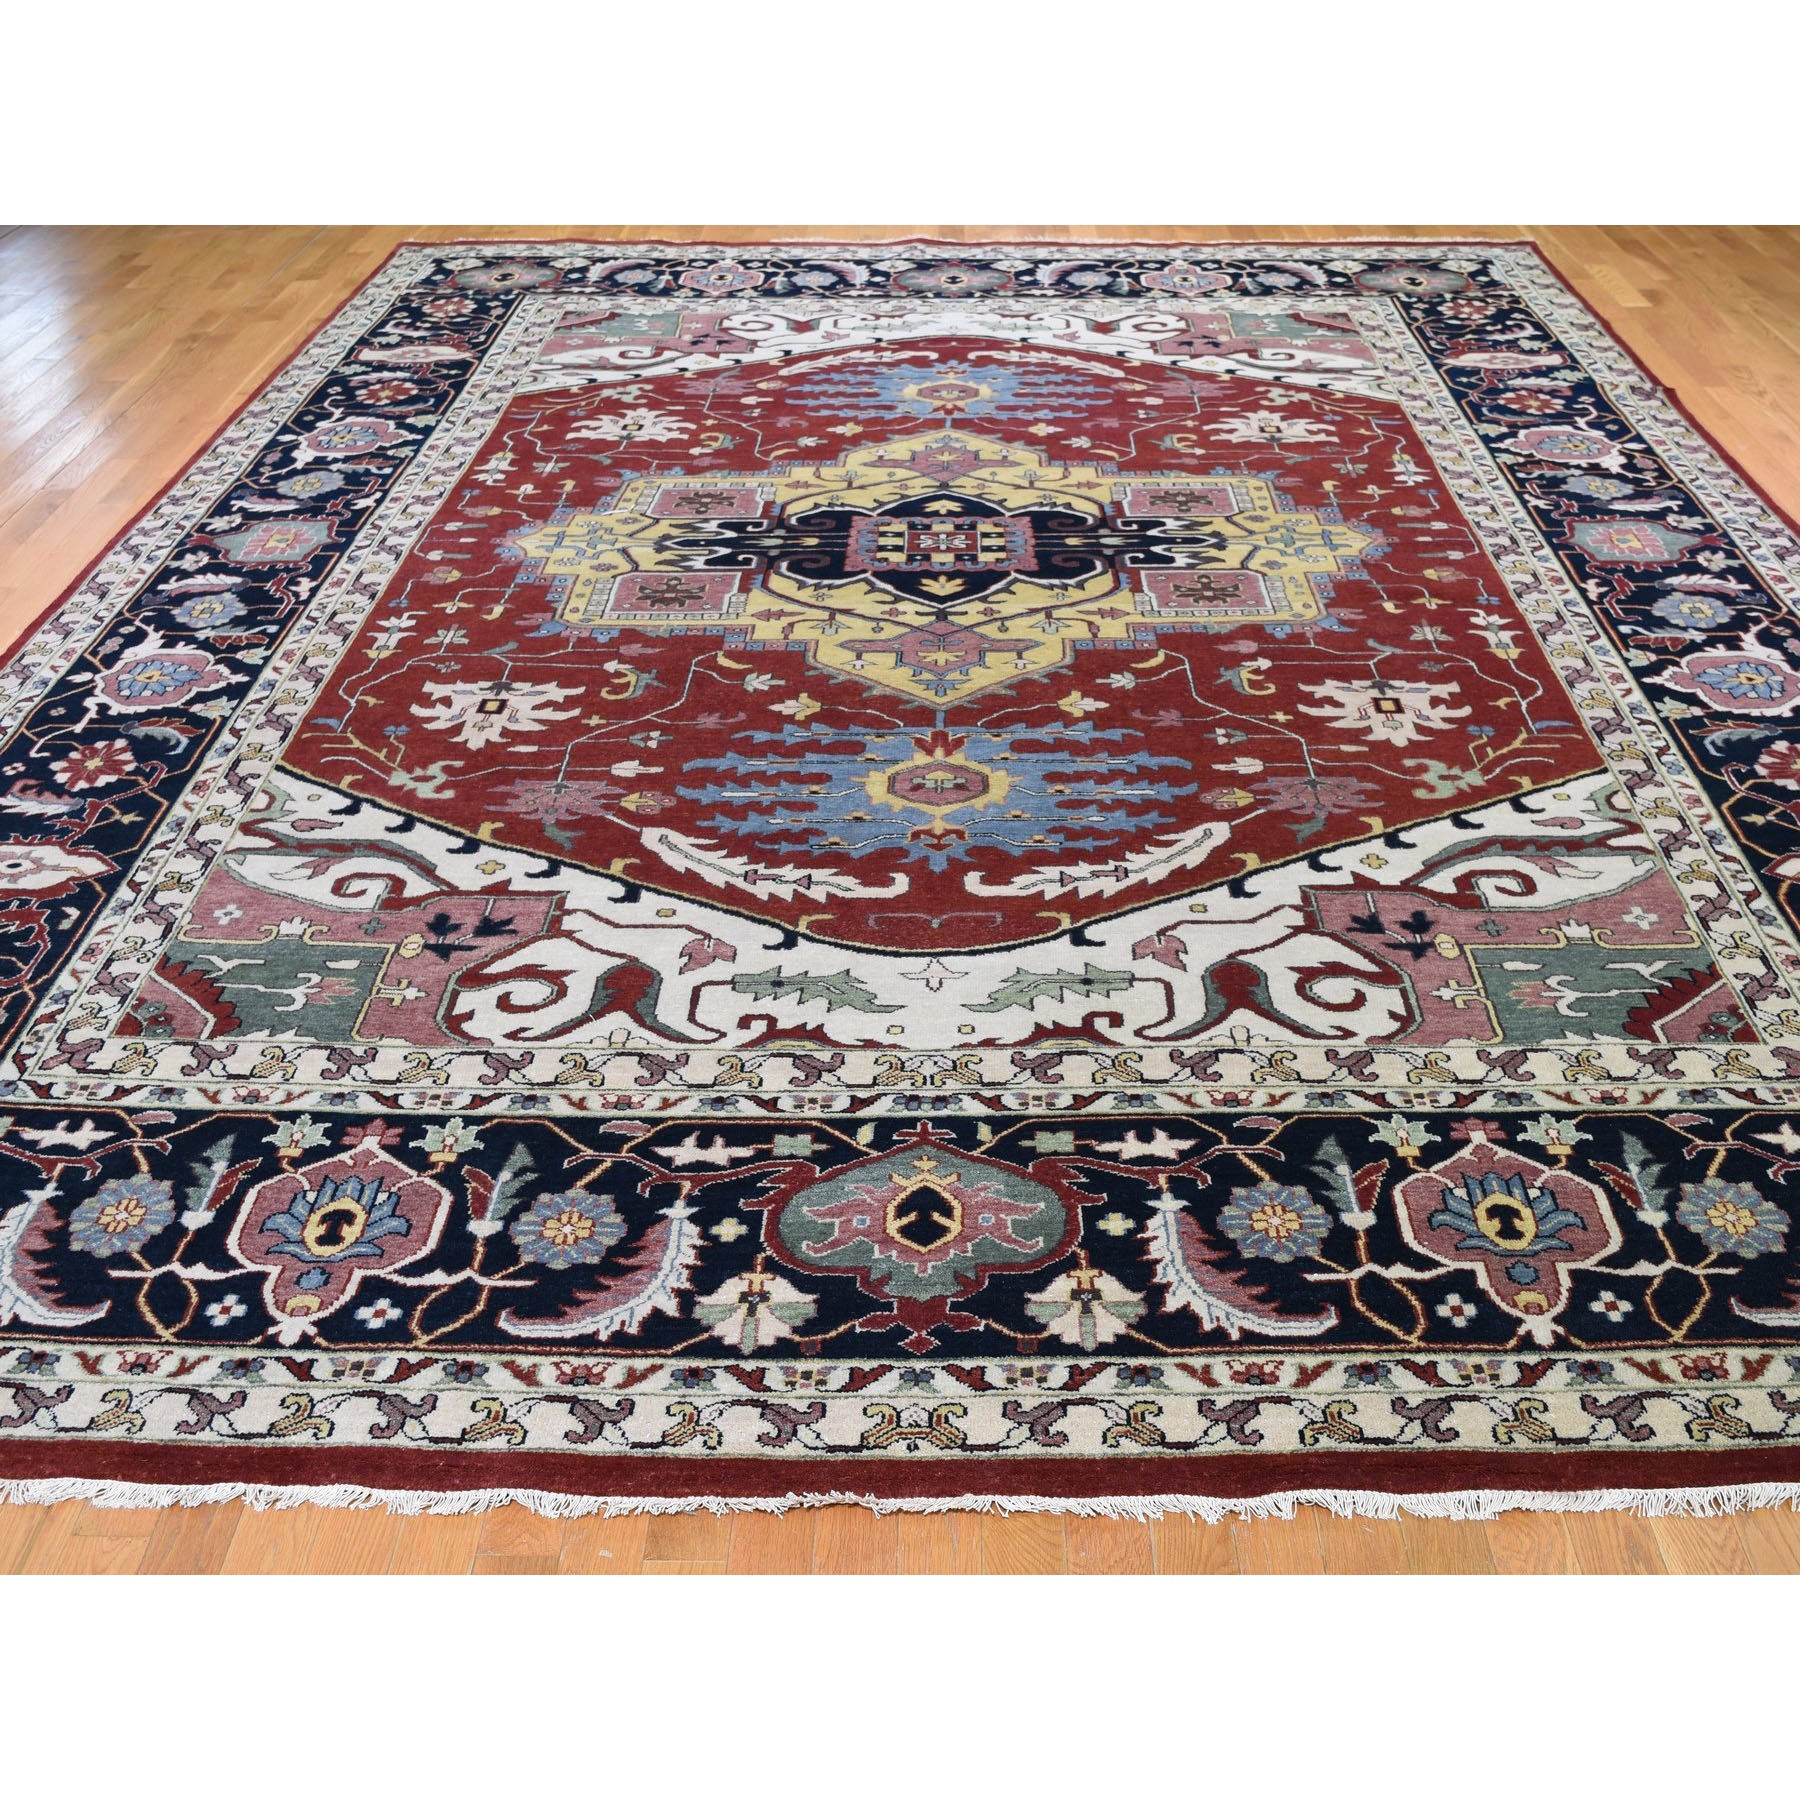 11-7 x15- Oversized Red Heriz Revival Pure Wool Hand Knotted Oriental Rug 